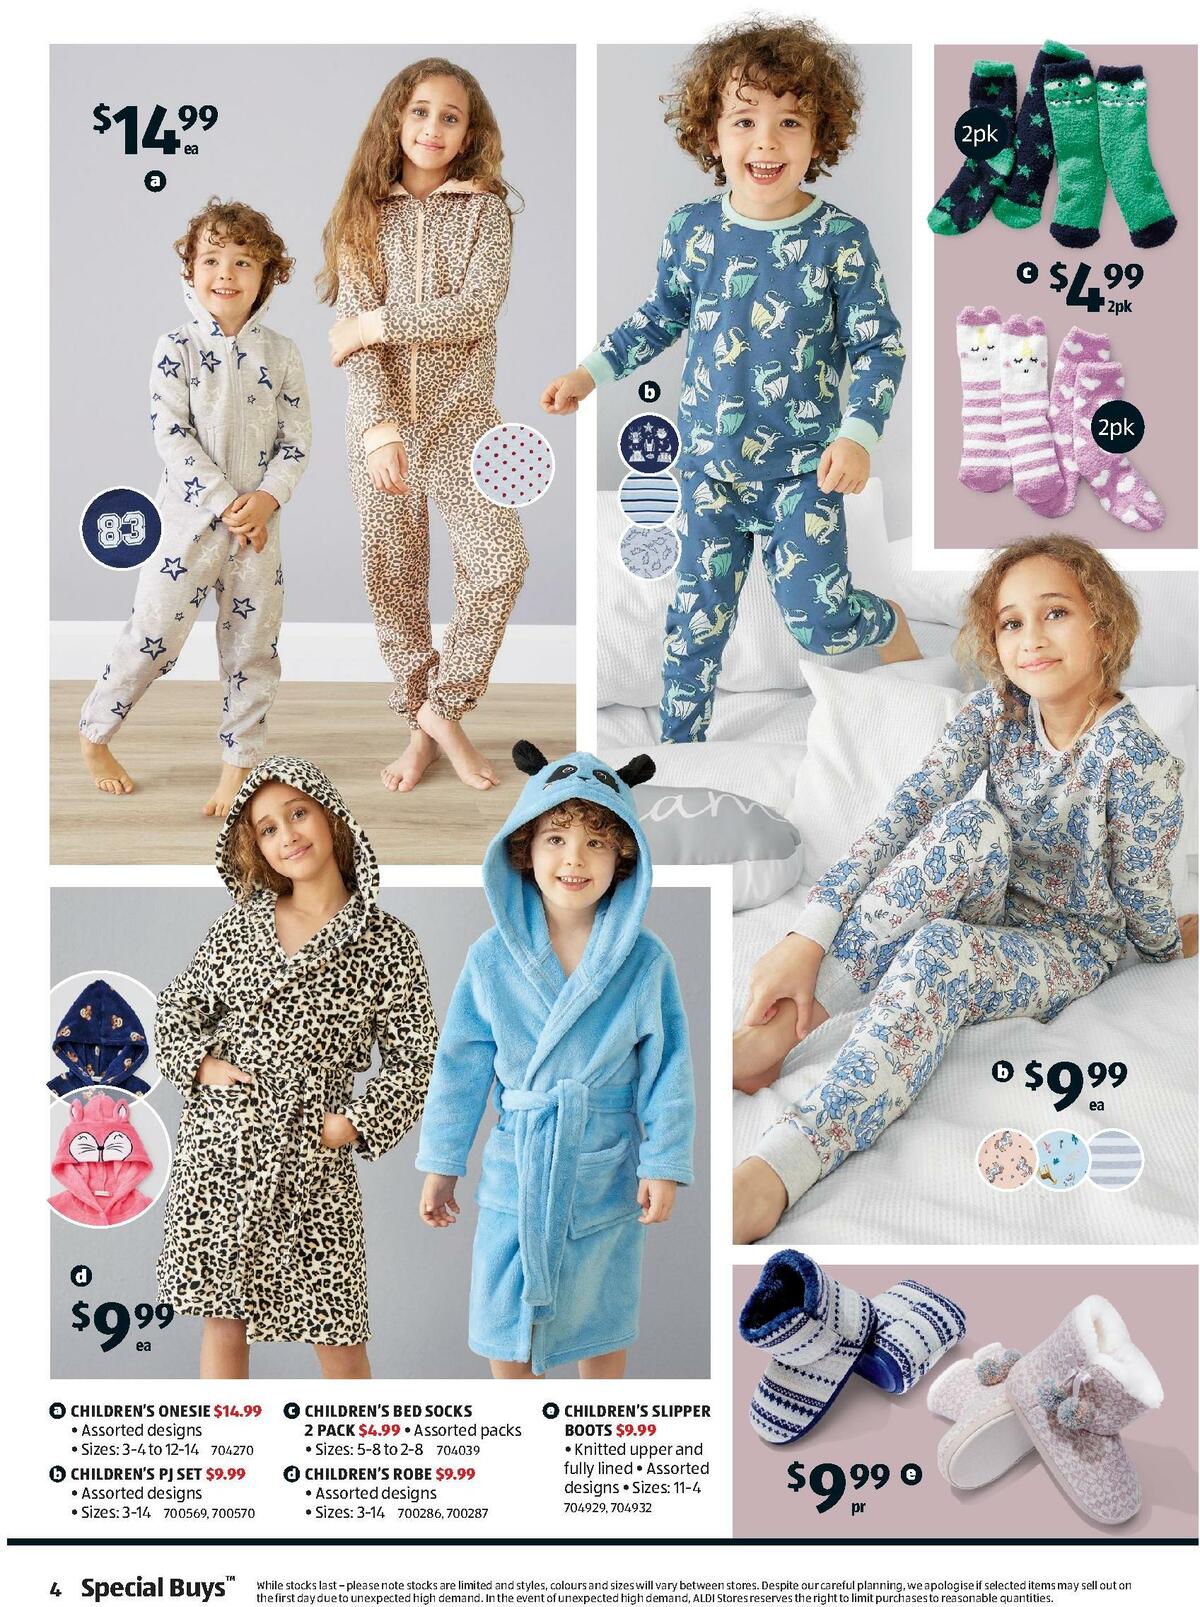 ALDI Catalogues from 14 April